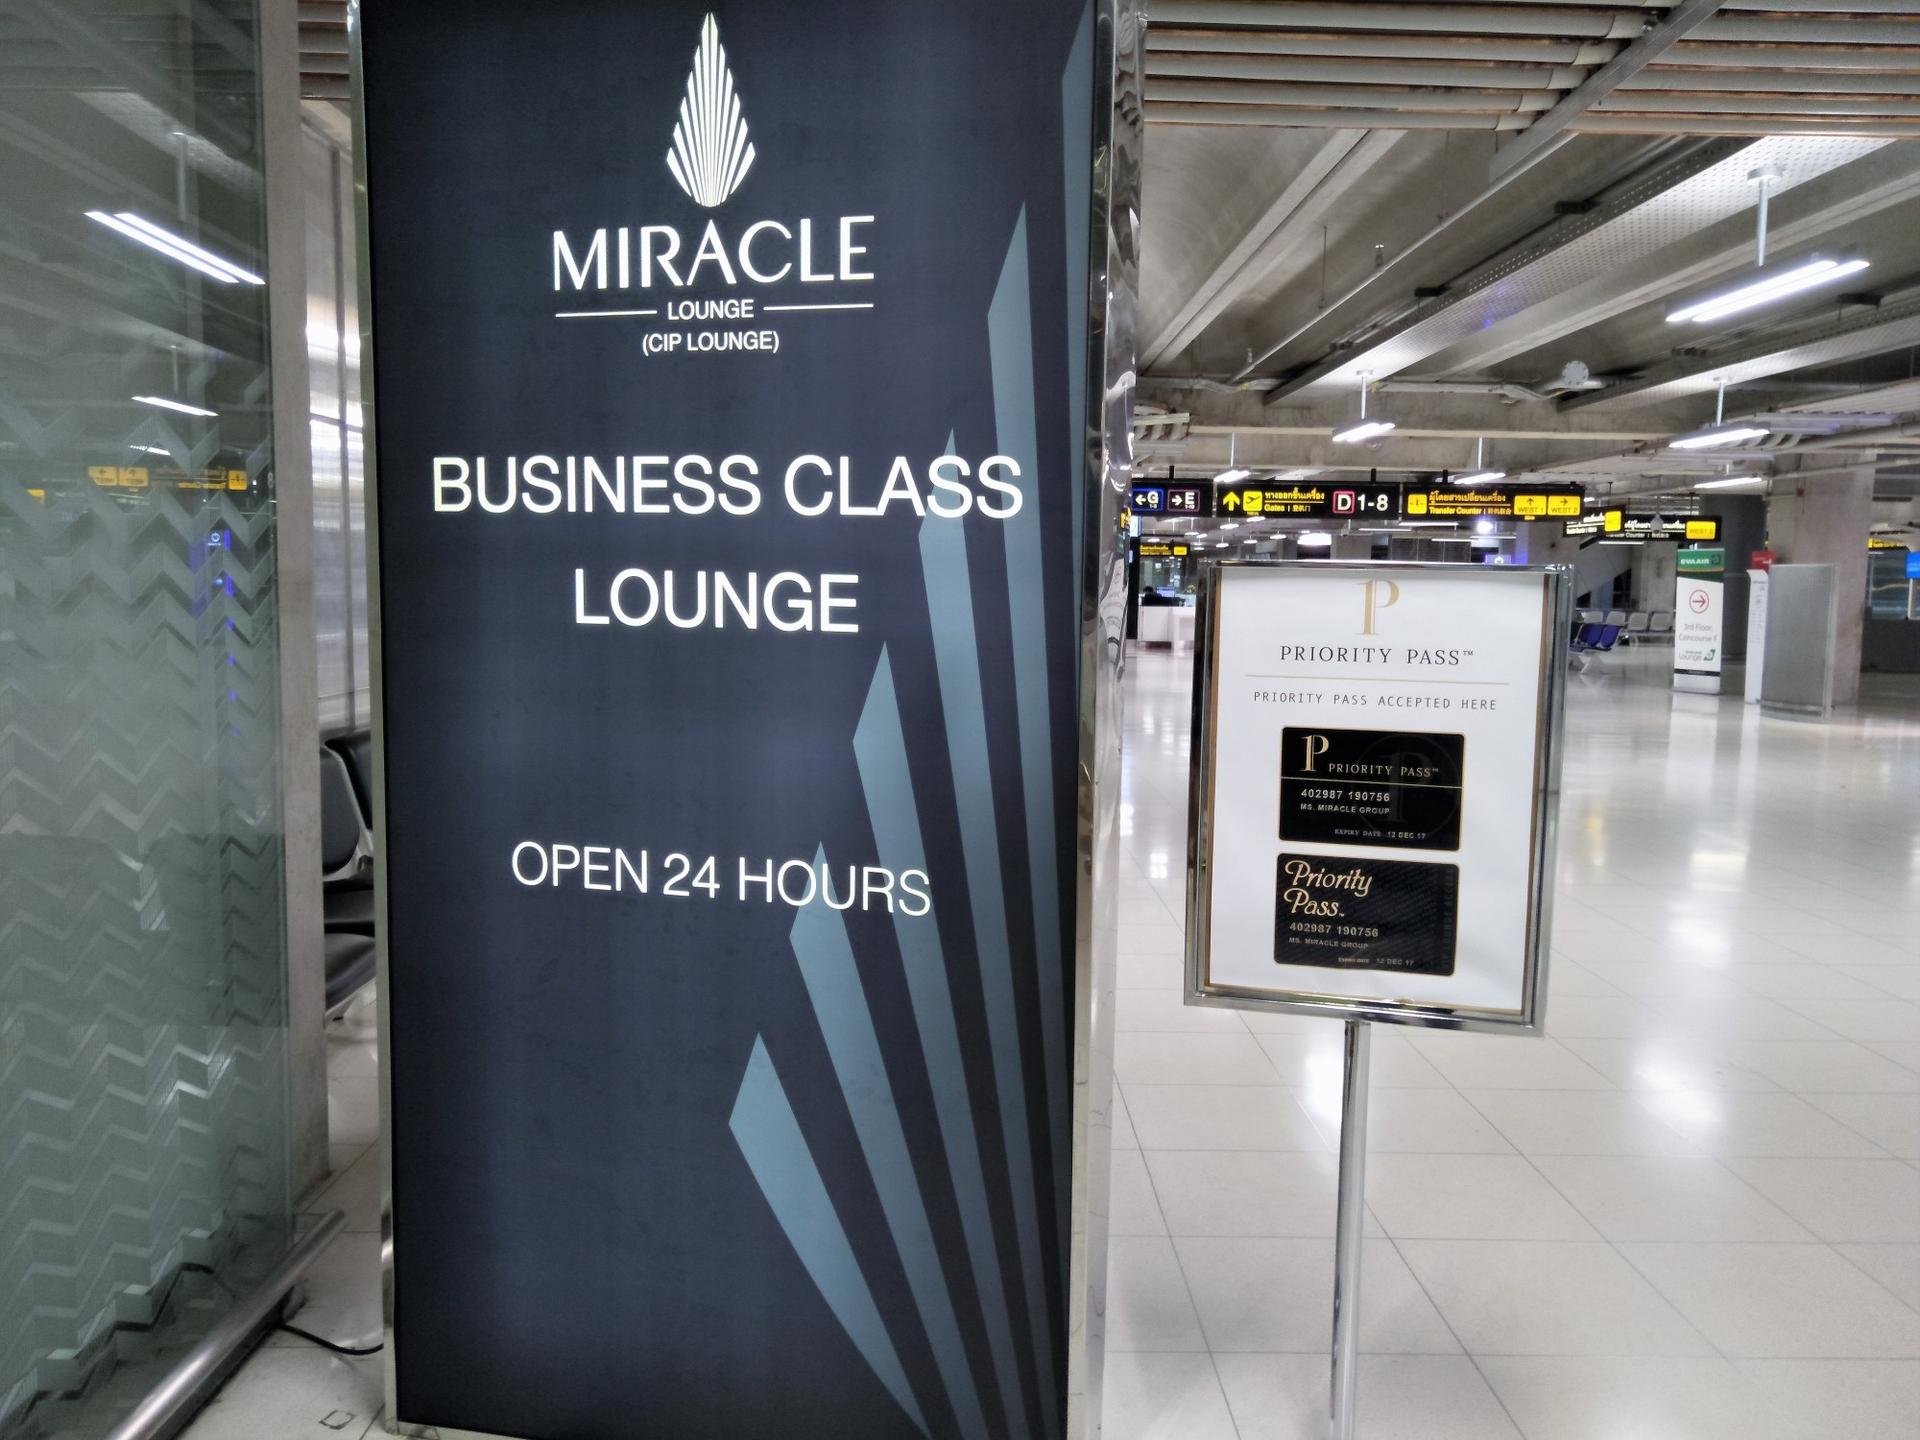 Miracle Business Class Lounge  image 13 of 26